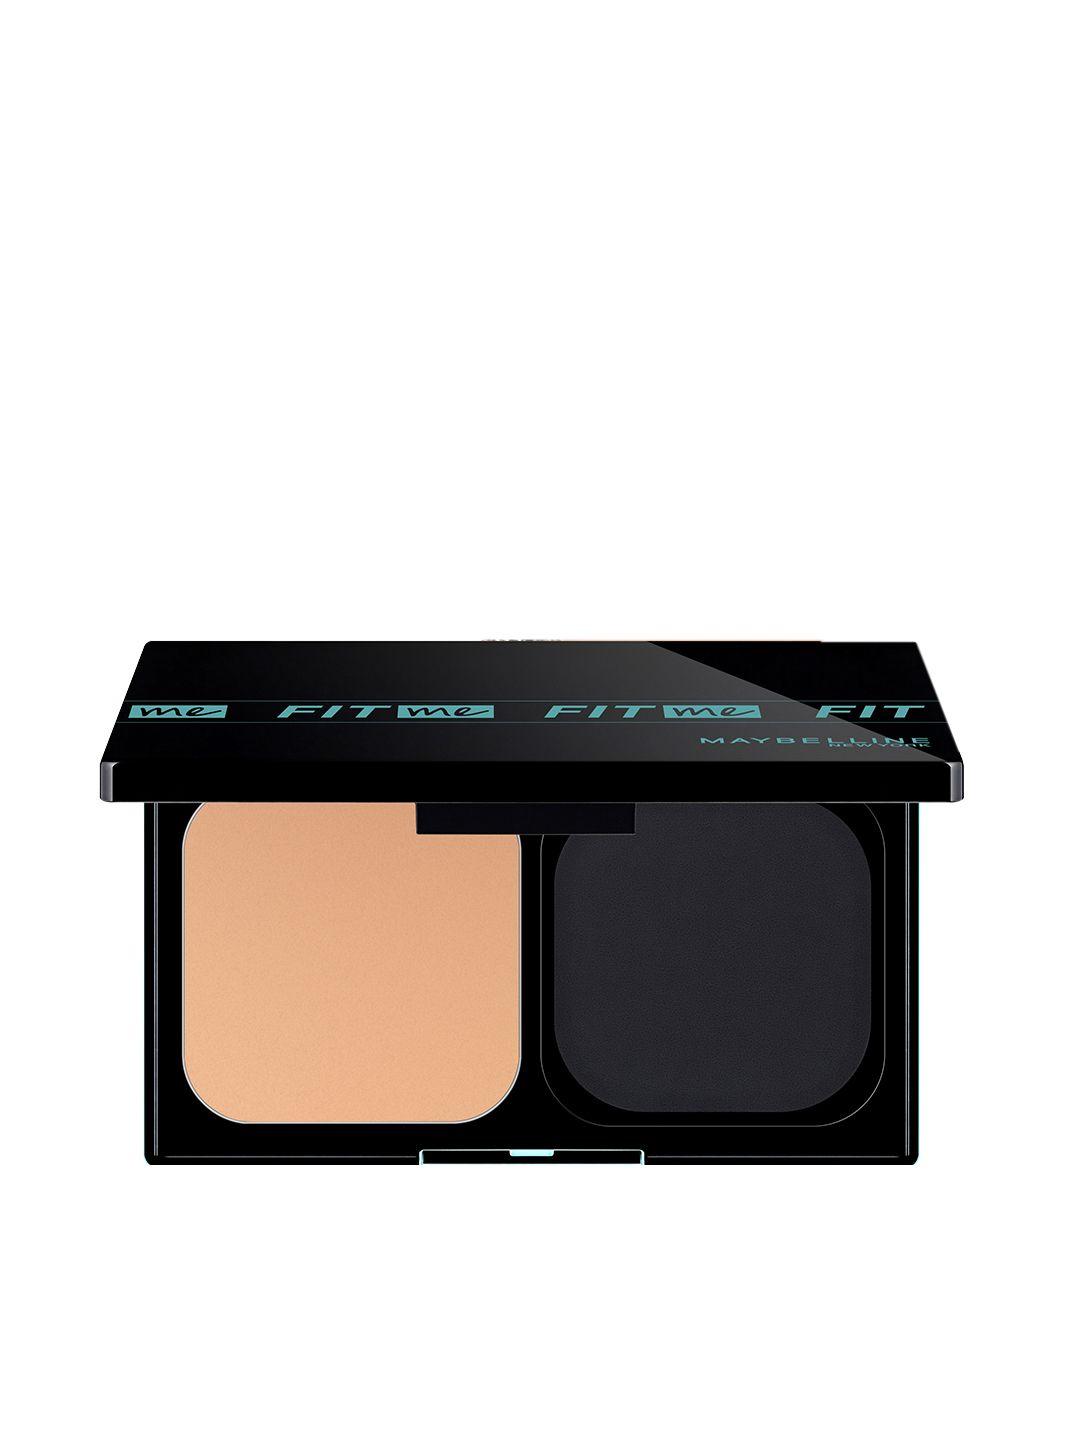 maybelline new york fit me spf 44 ultimate powder foundation - shade 230